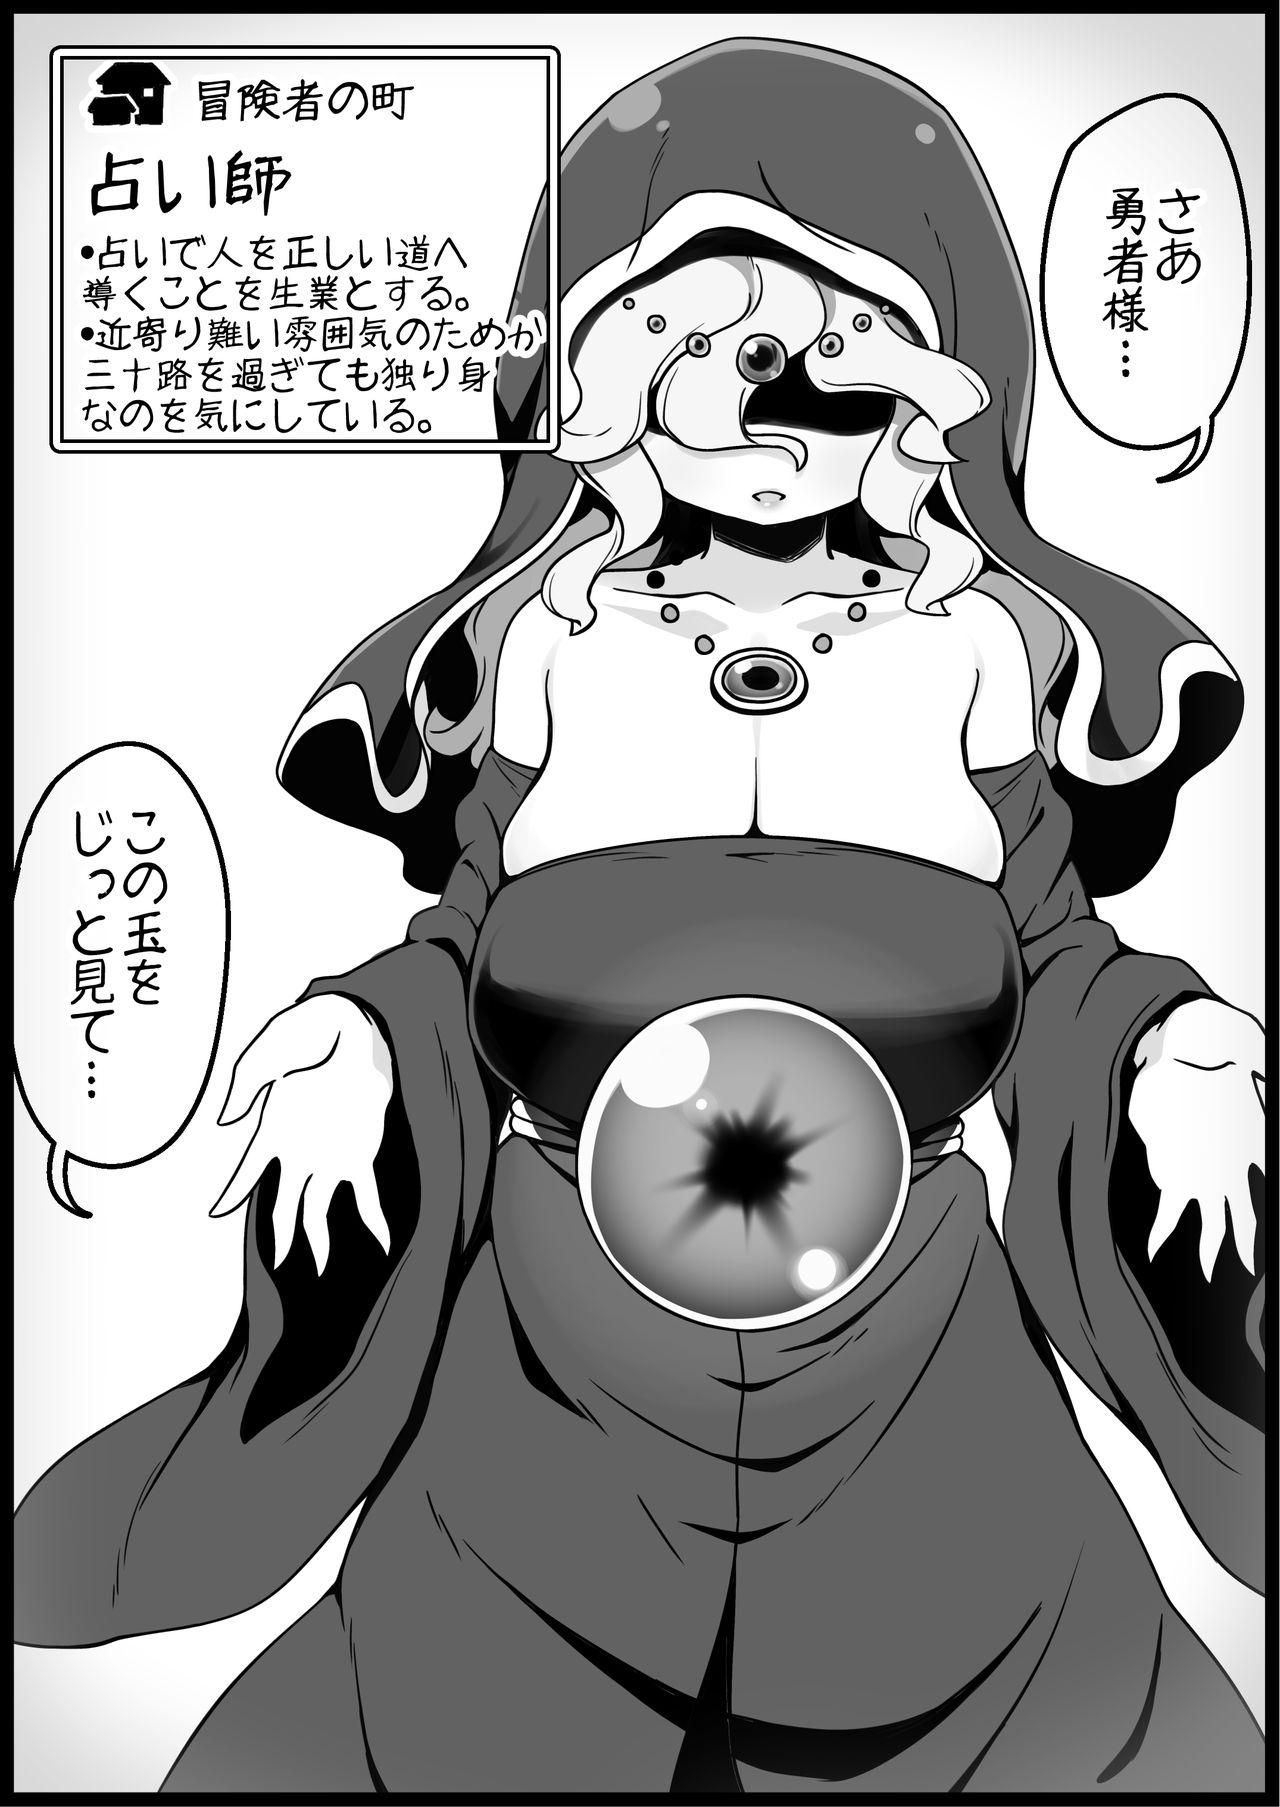 Car [Succubus Egg] Fantasy World 2 Too Forgiving to Heroes-Continued NPC (mob) Opponent-Centered Short H Manga Collection- - Original Hd Porn - Page 6